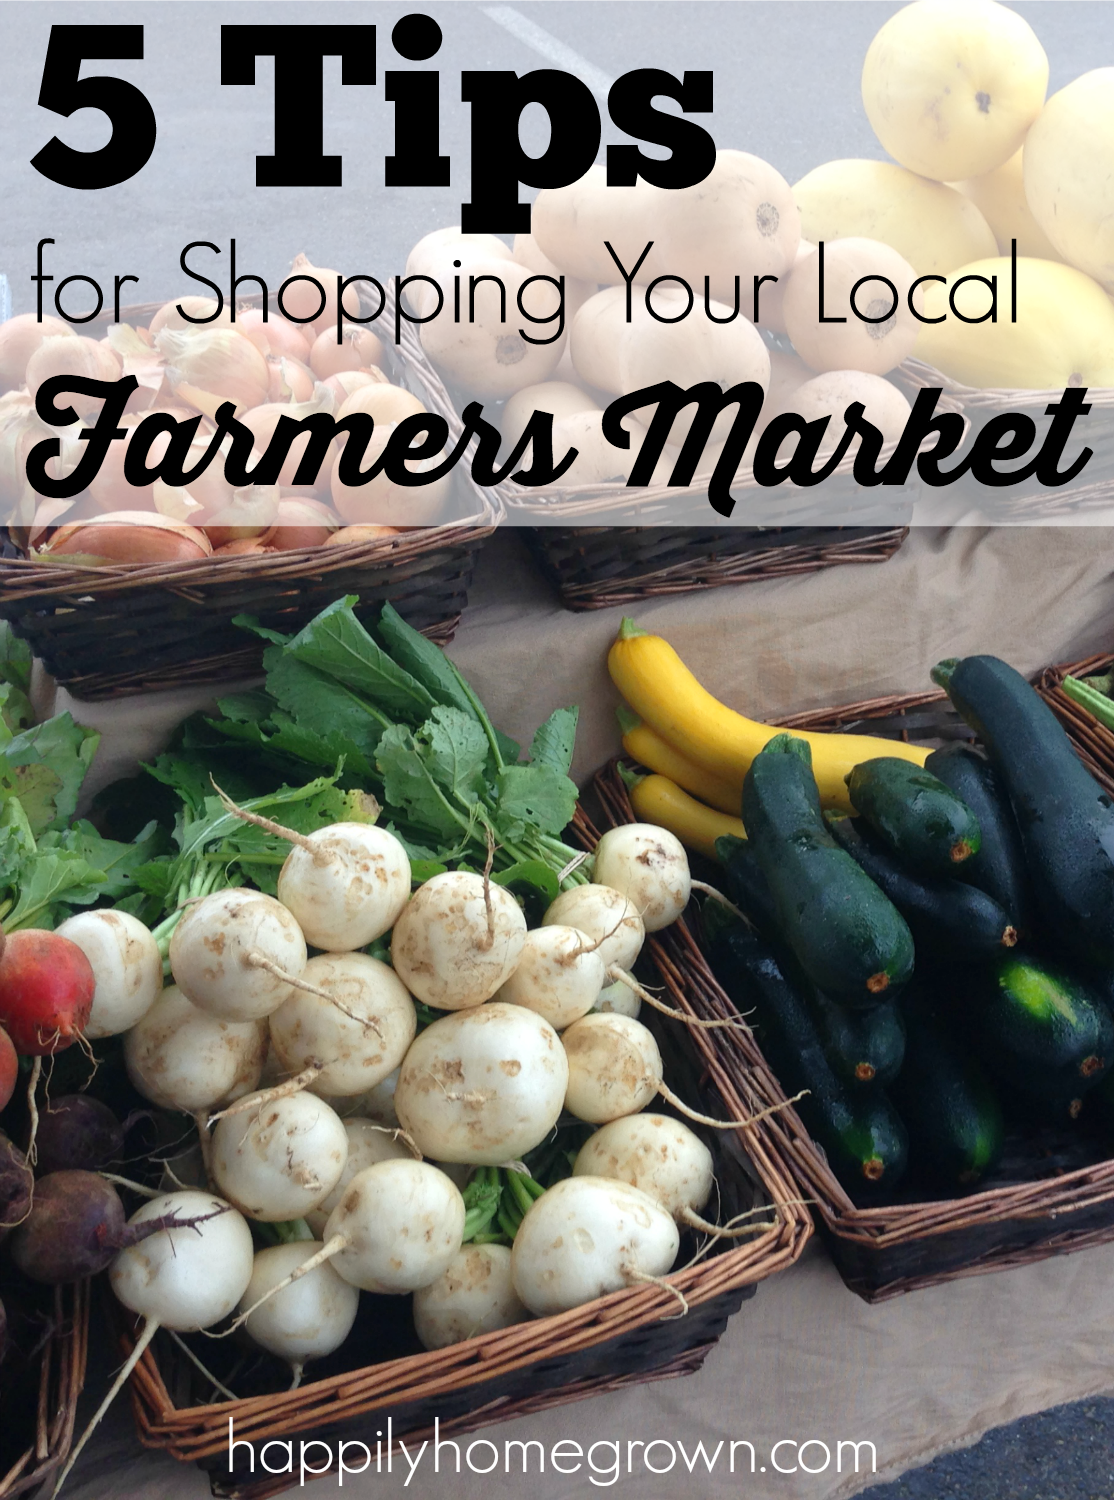 The next best thing to growing your own food is supporting your local farmers. Here are 5 tips for shopping your local farmers' market.